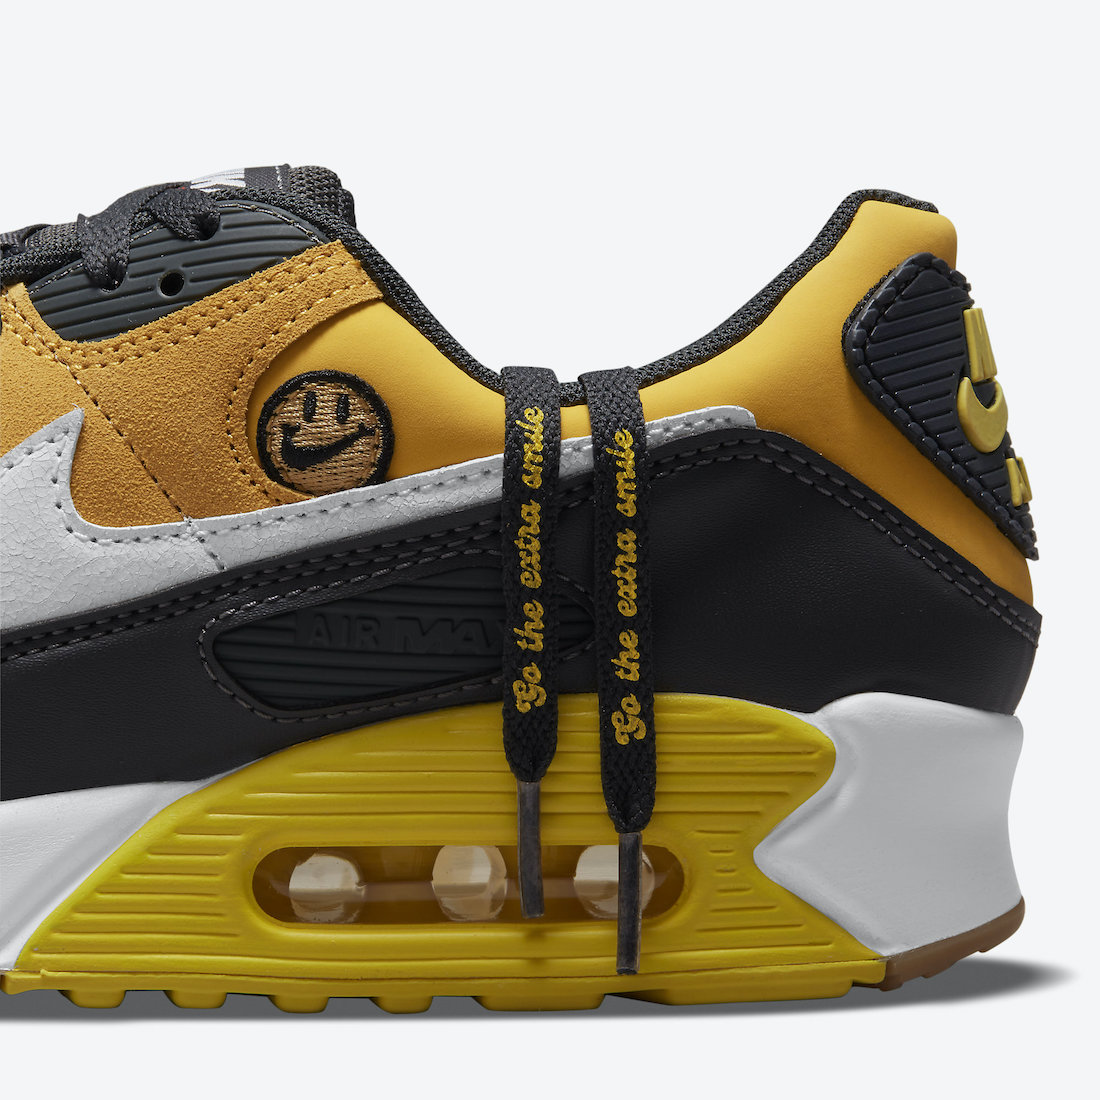 Nike-Air-Max-90-Go-The-Extra-Smile-DO5848-700-Release-Date-8